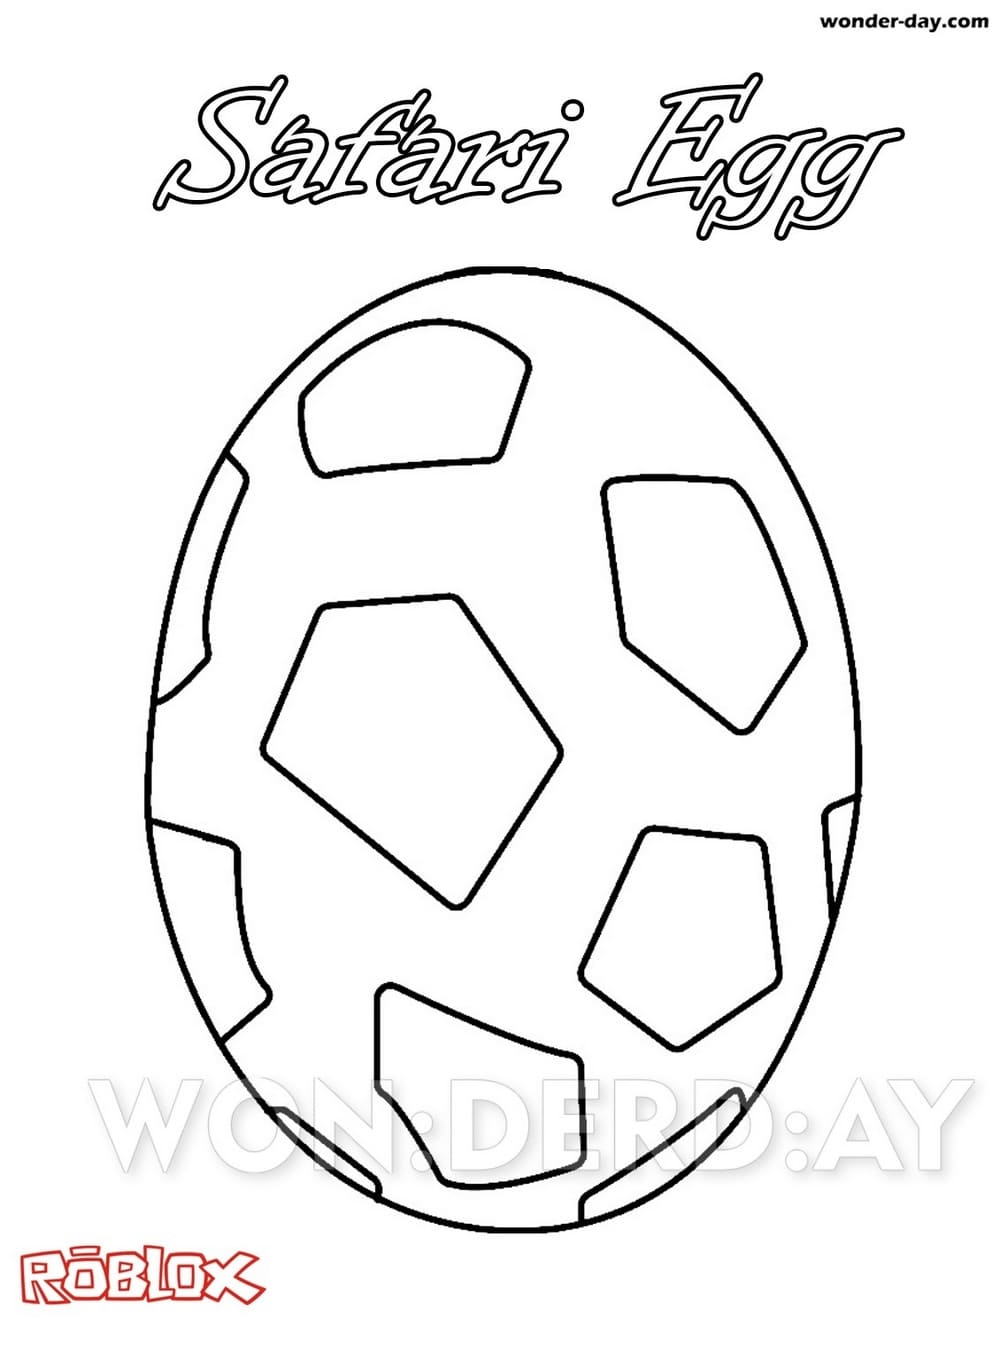 Adopt Me Coloring Pages Wonder Day Com - the pirate egg roblox